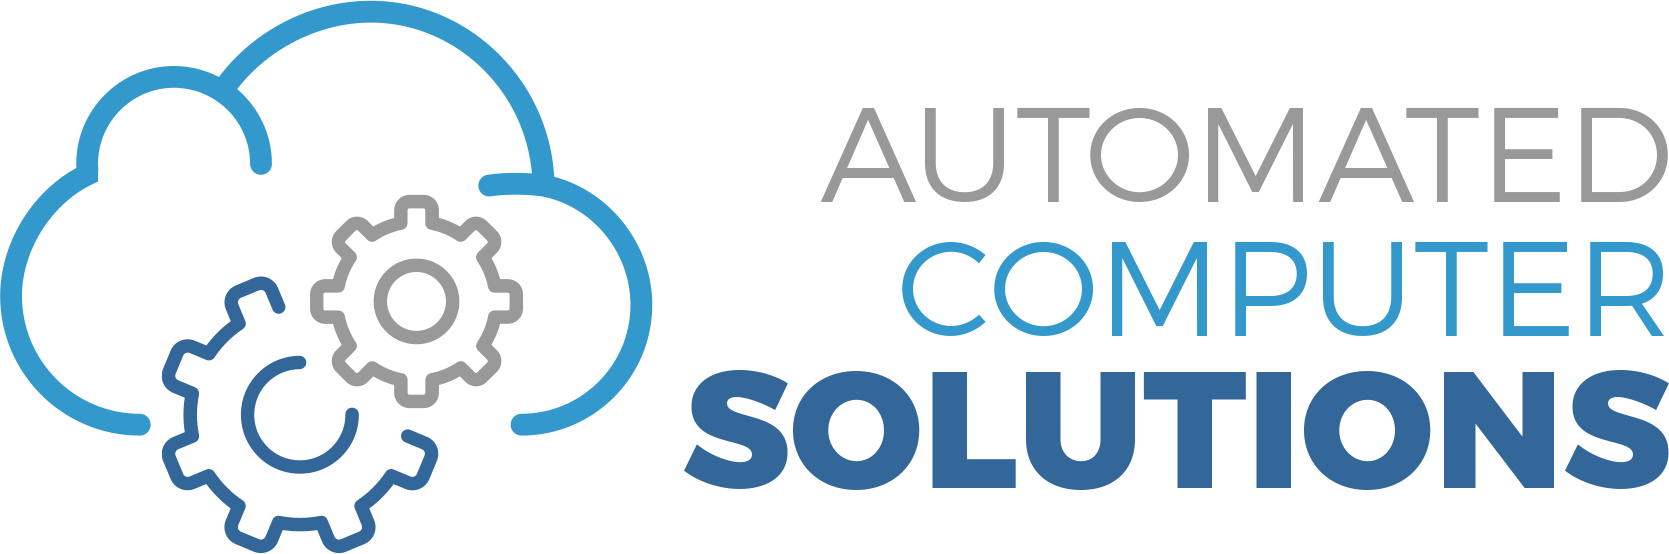 Automated Computer Solutions